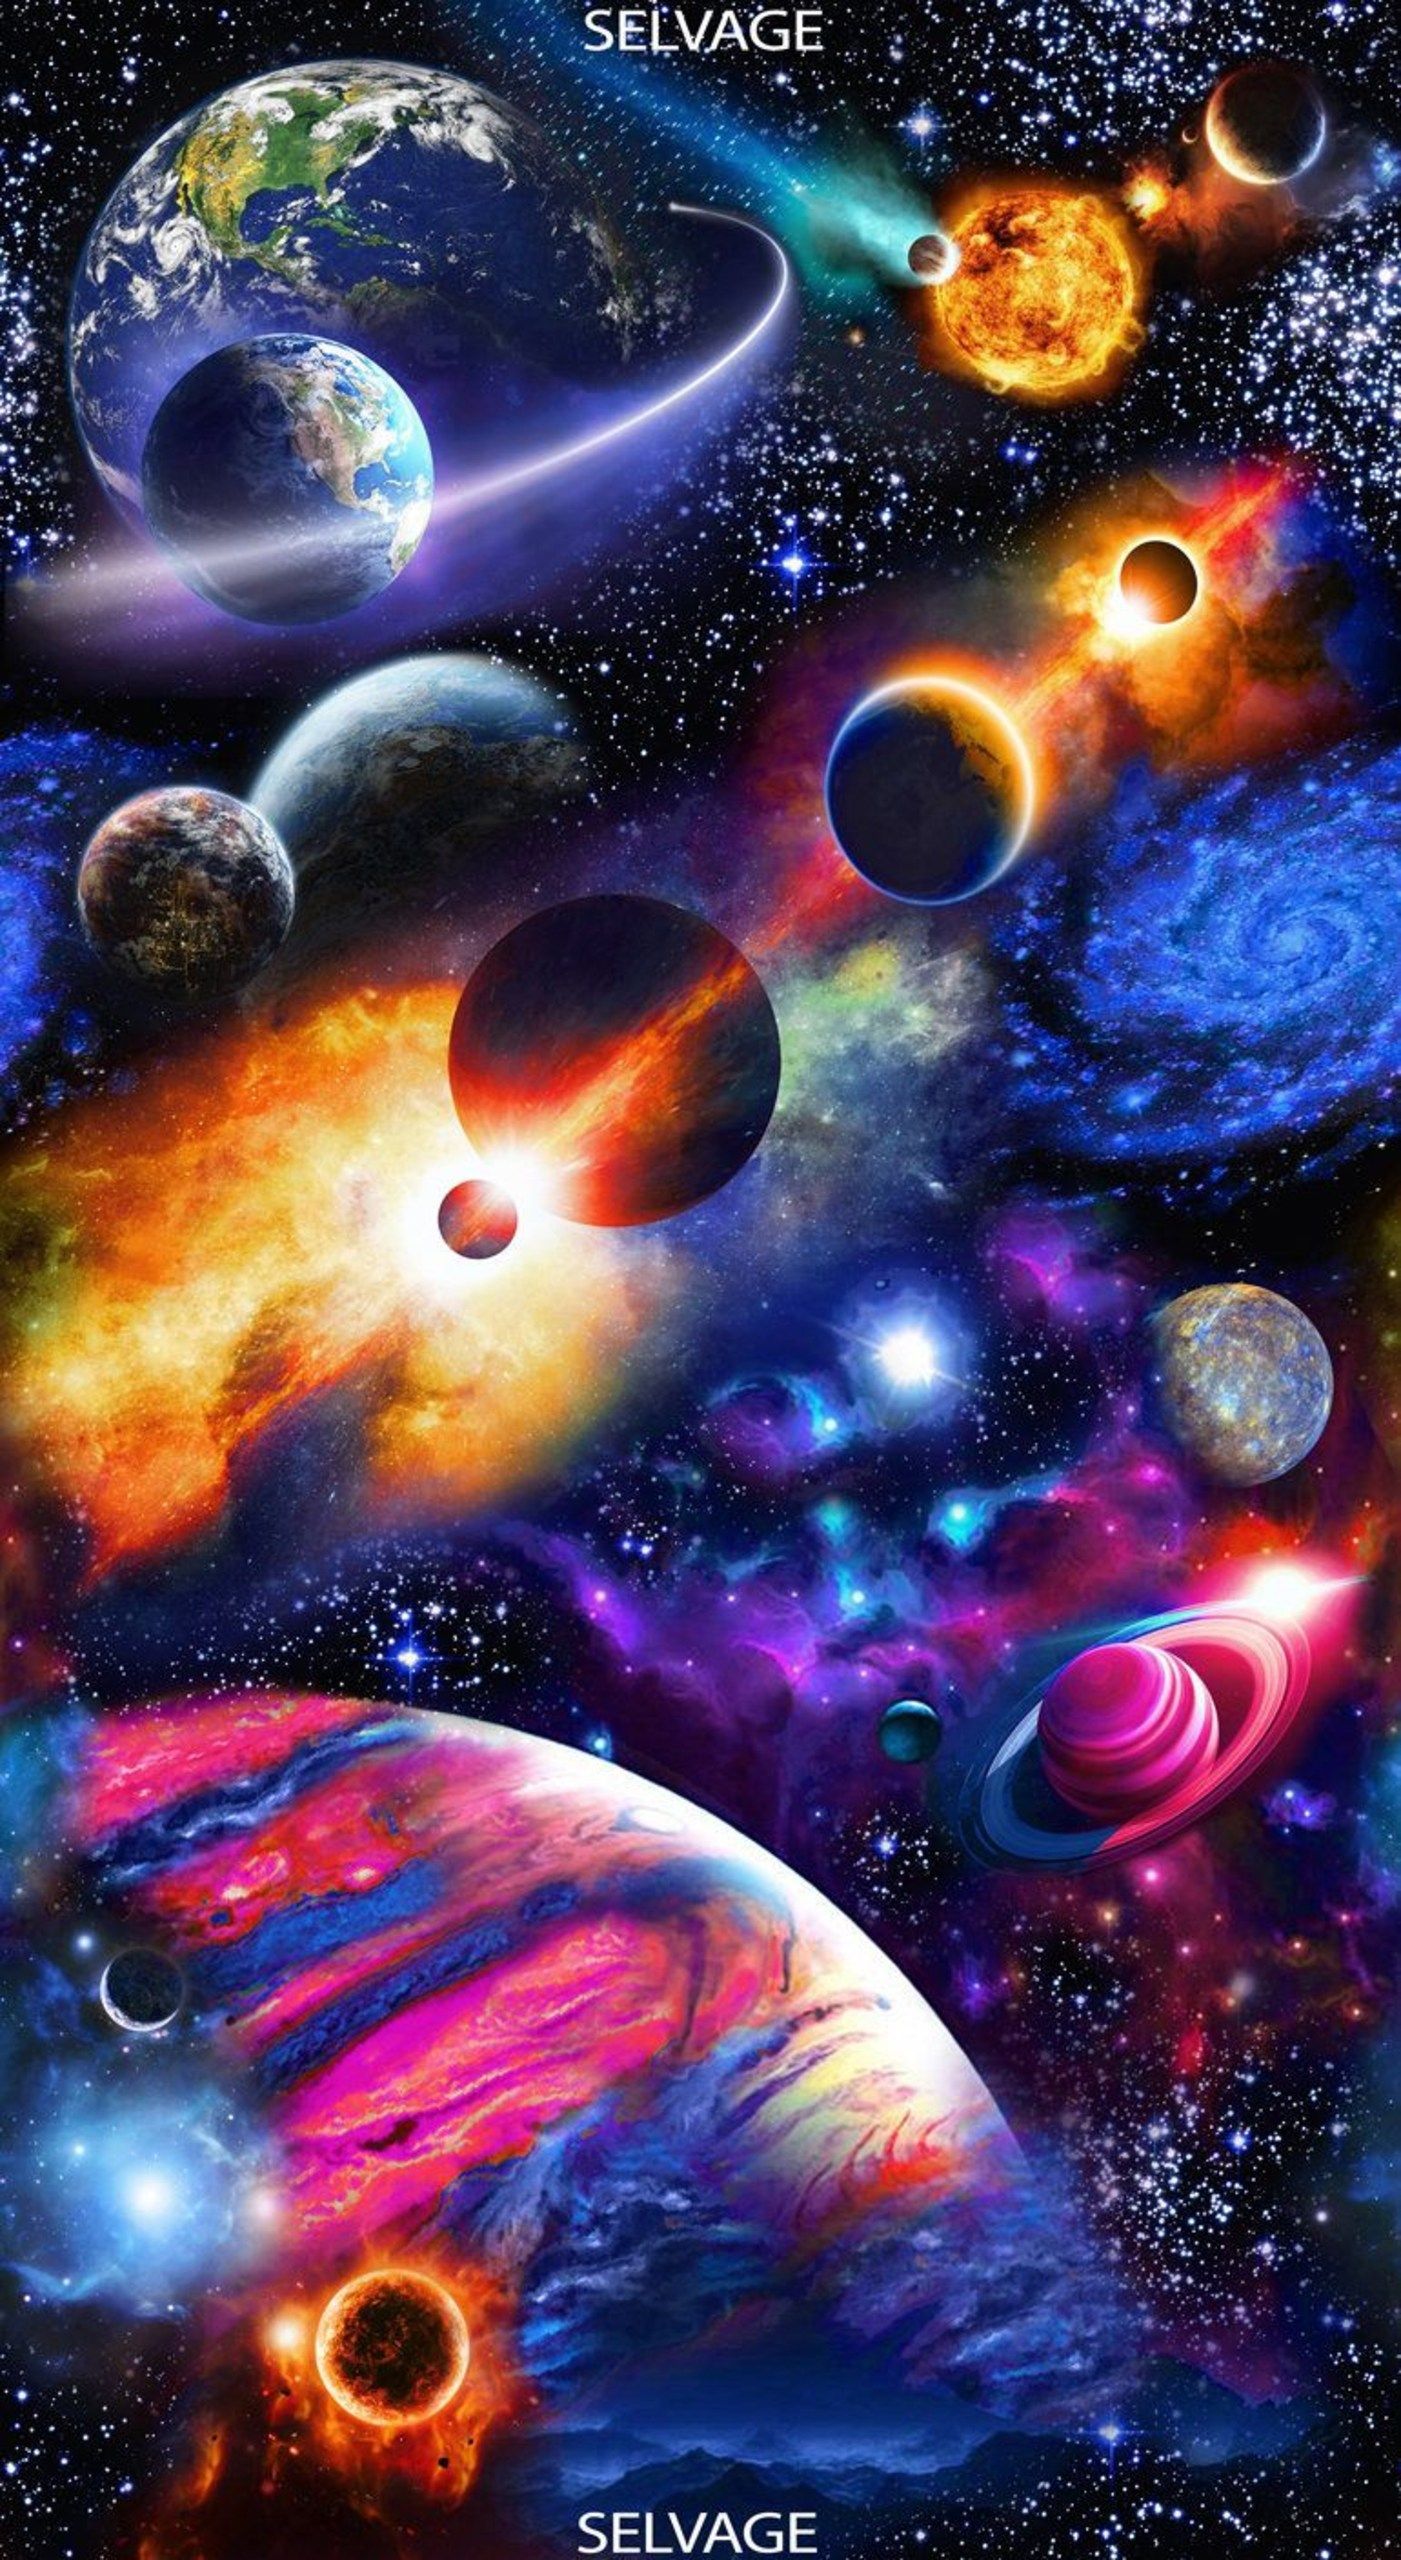 Details space wallpaper aesthetic